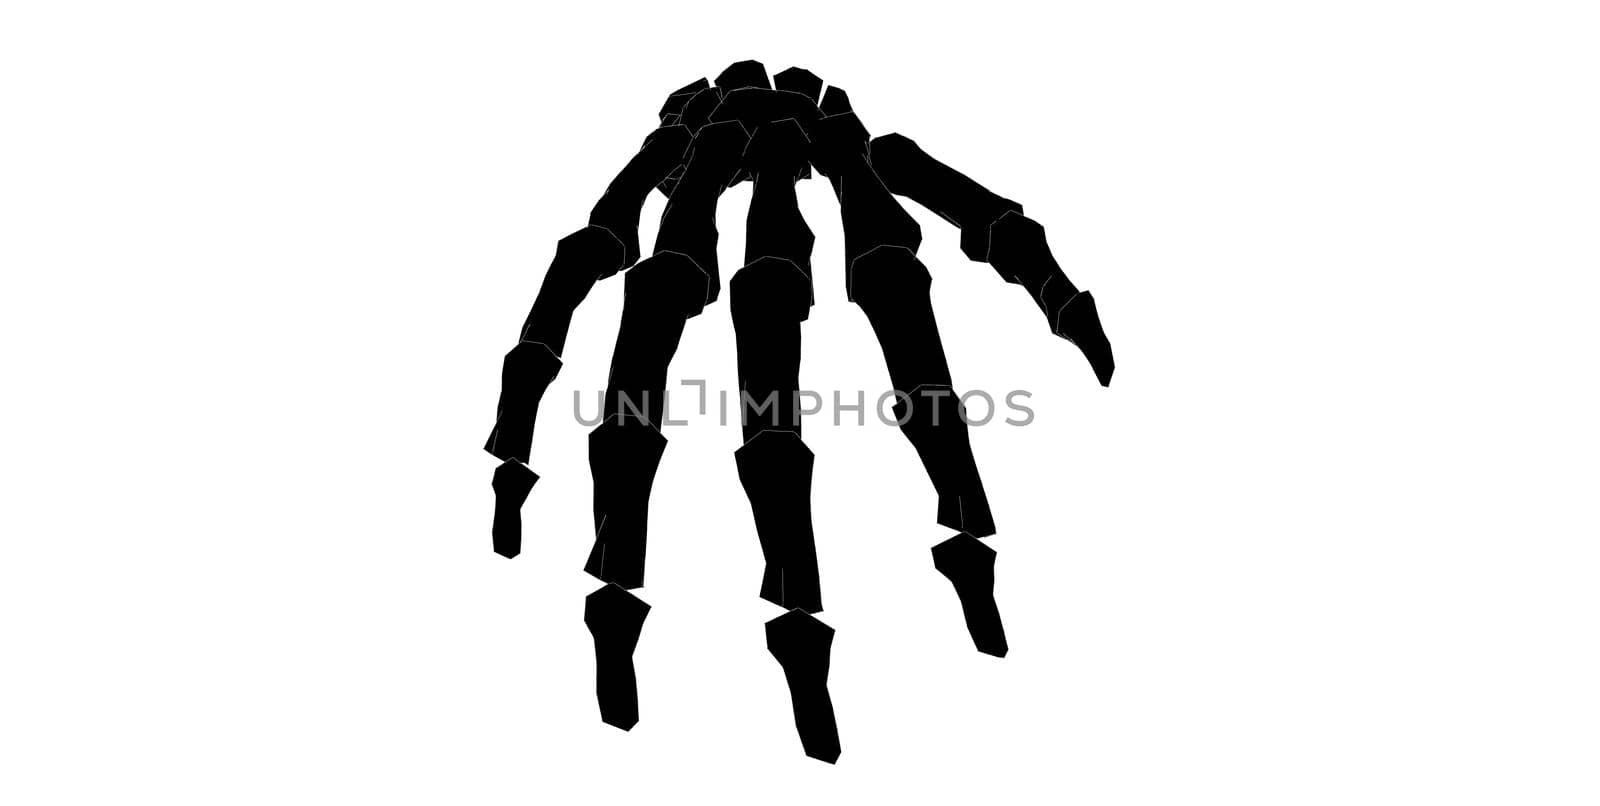 Front view of forearm in black and white isolated background by tabishere